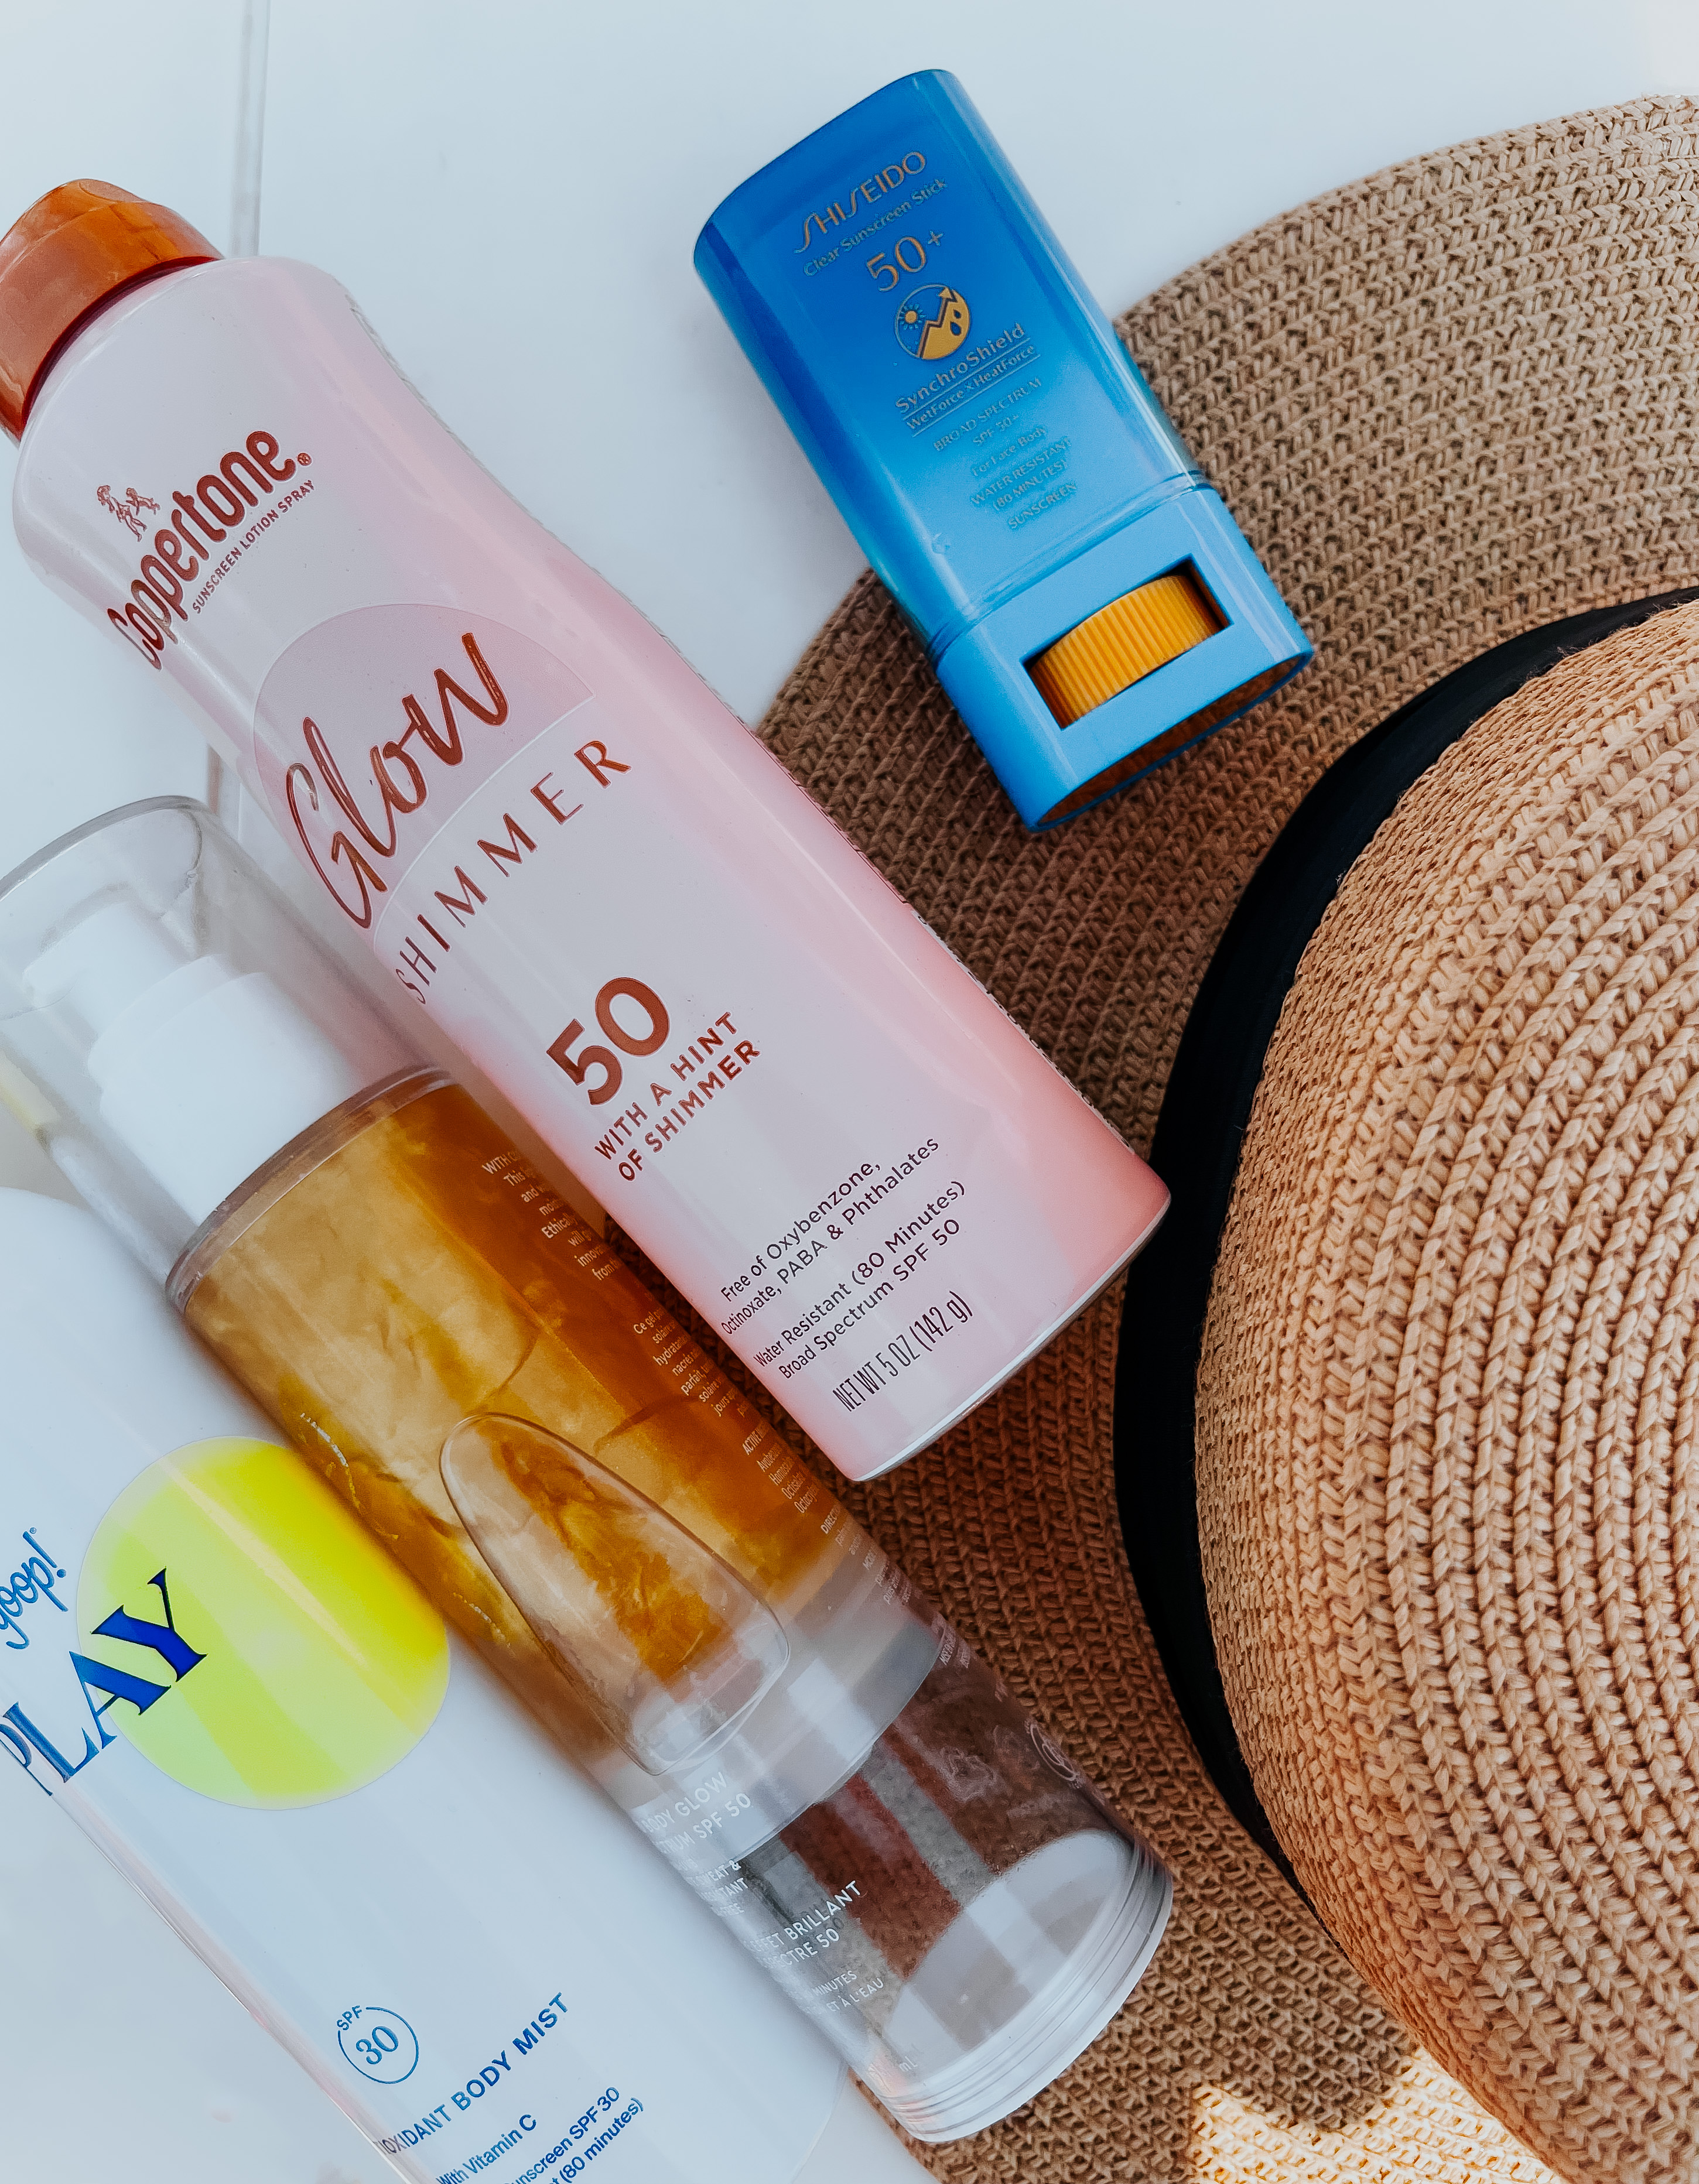 sunscreen favorites - This is our Bliss #bestsunscreen